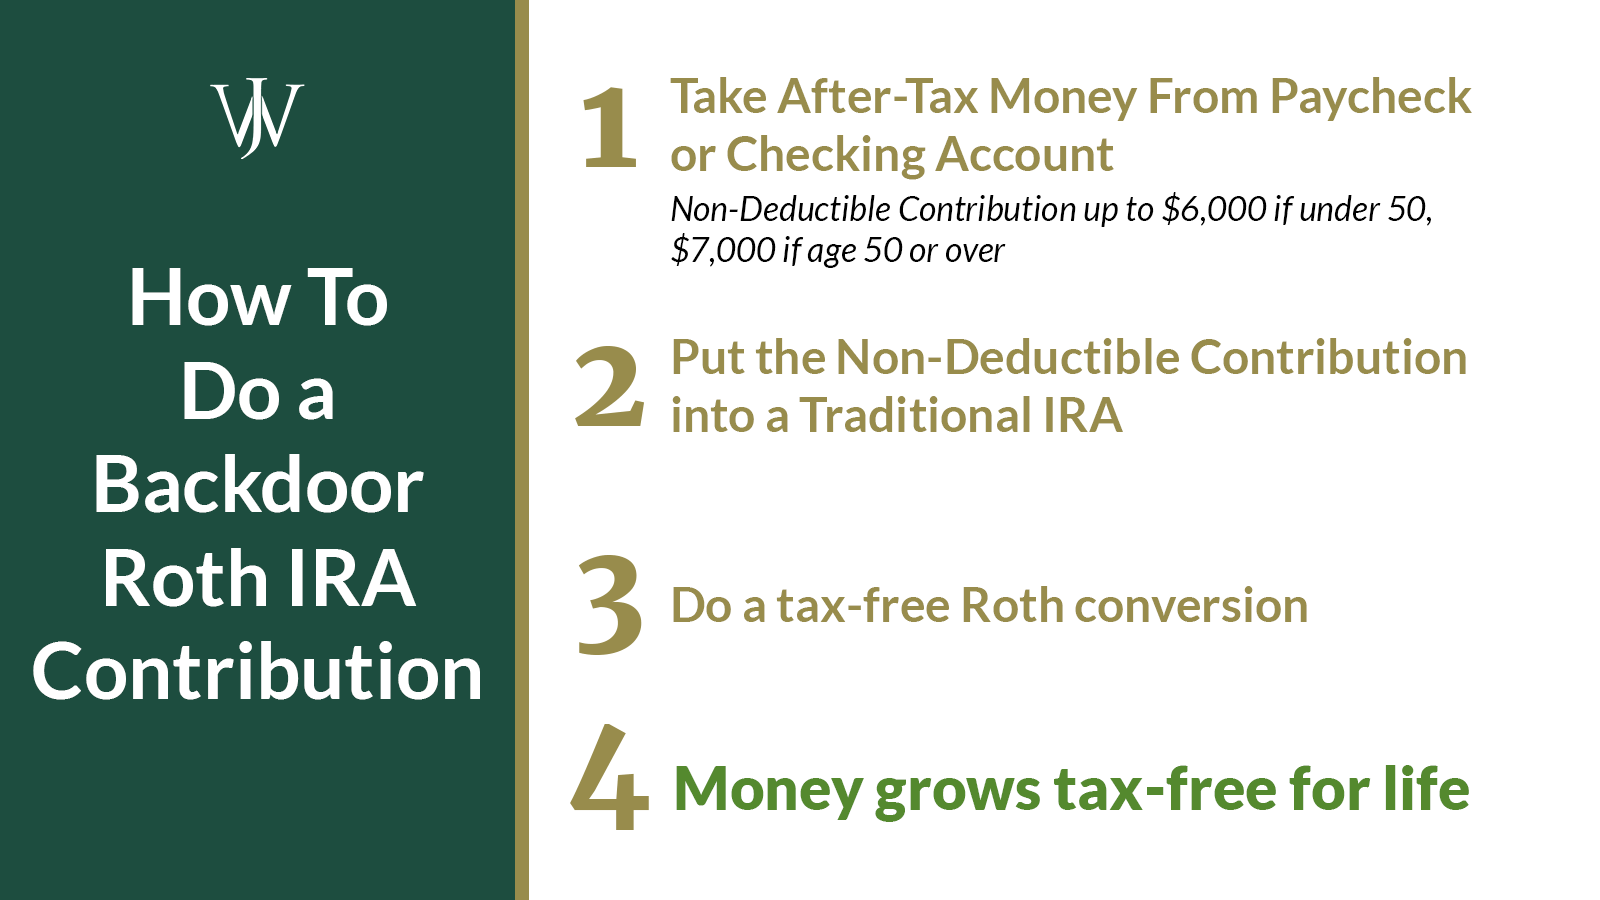 How To Use a Backdoor Roth for TaxFree Savings